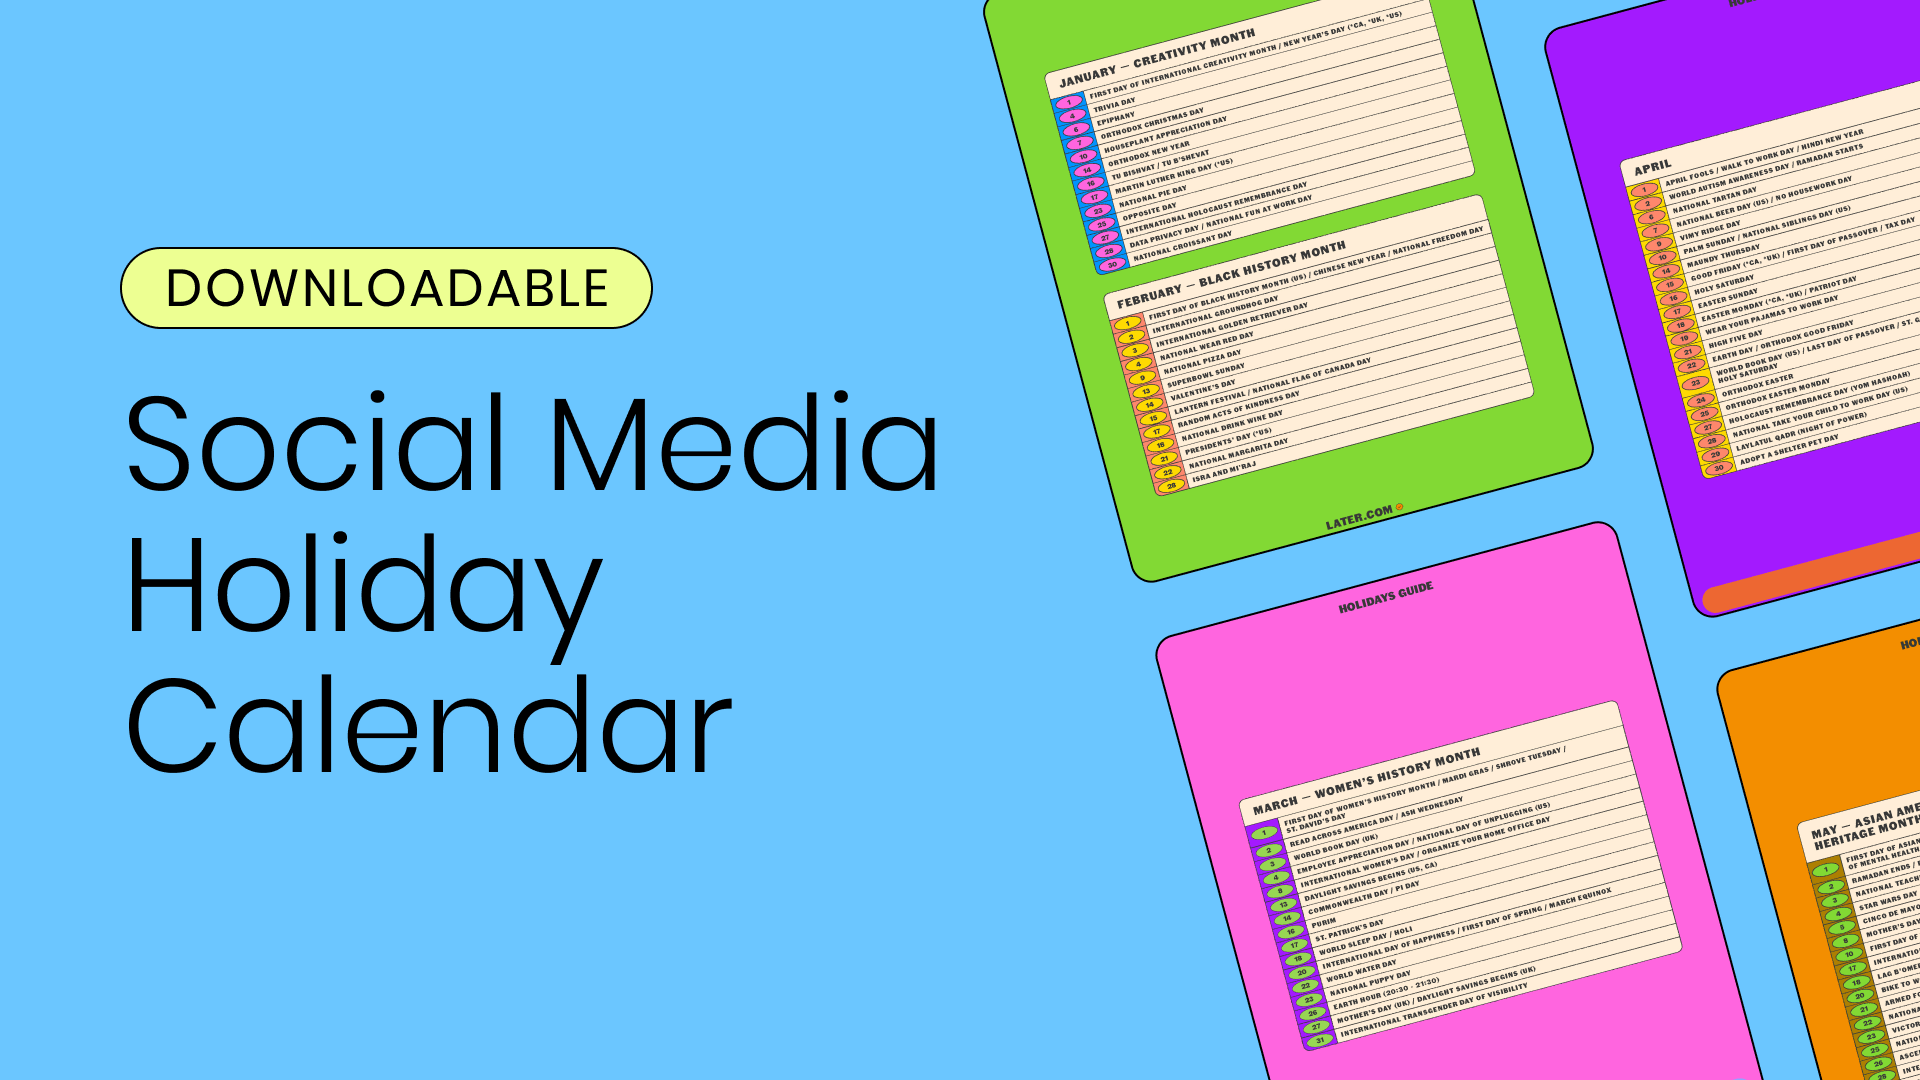 Social media holiday calendar showing examples of socially important dates